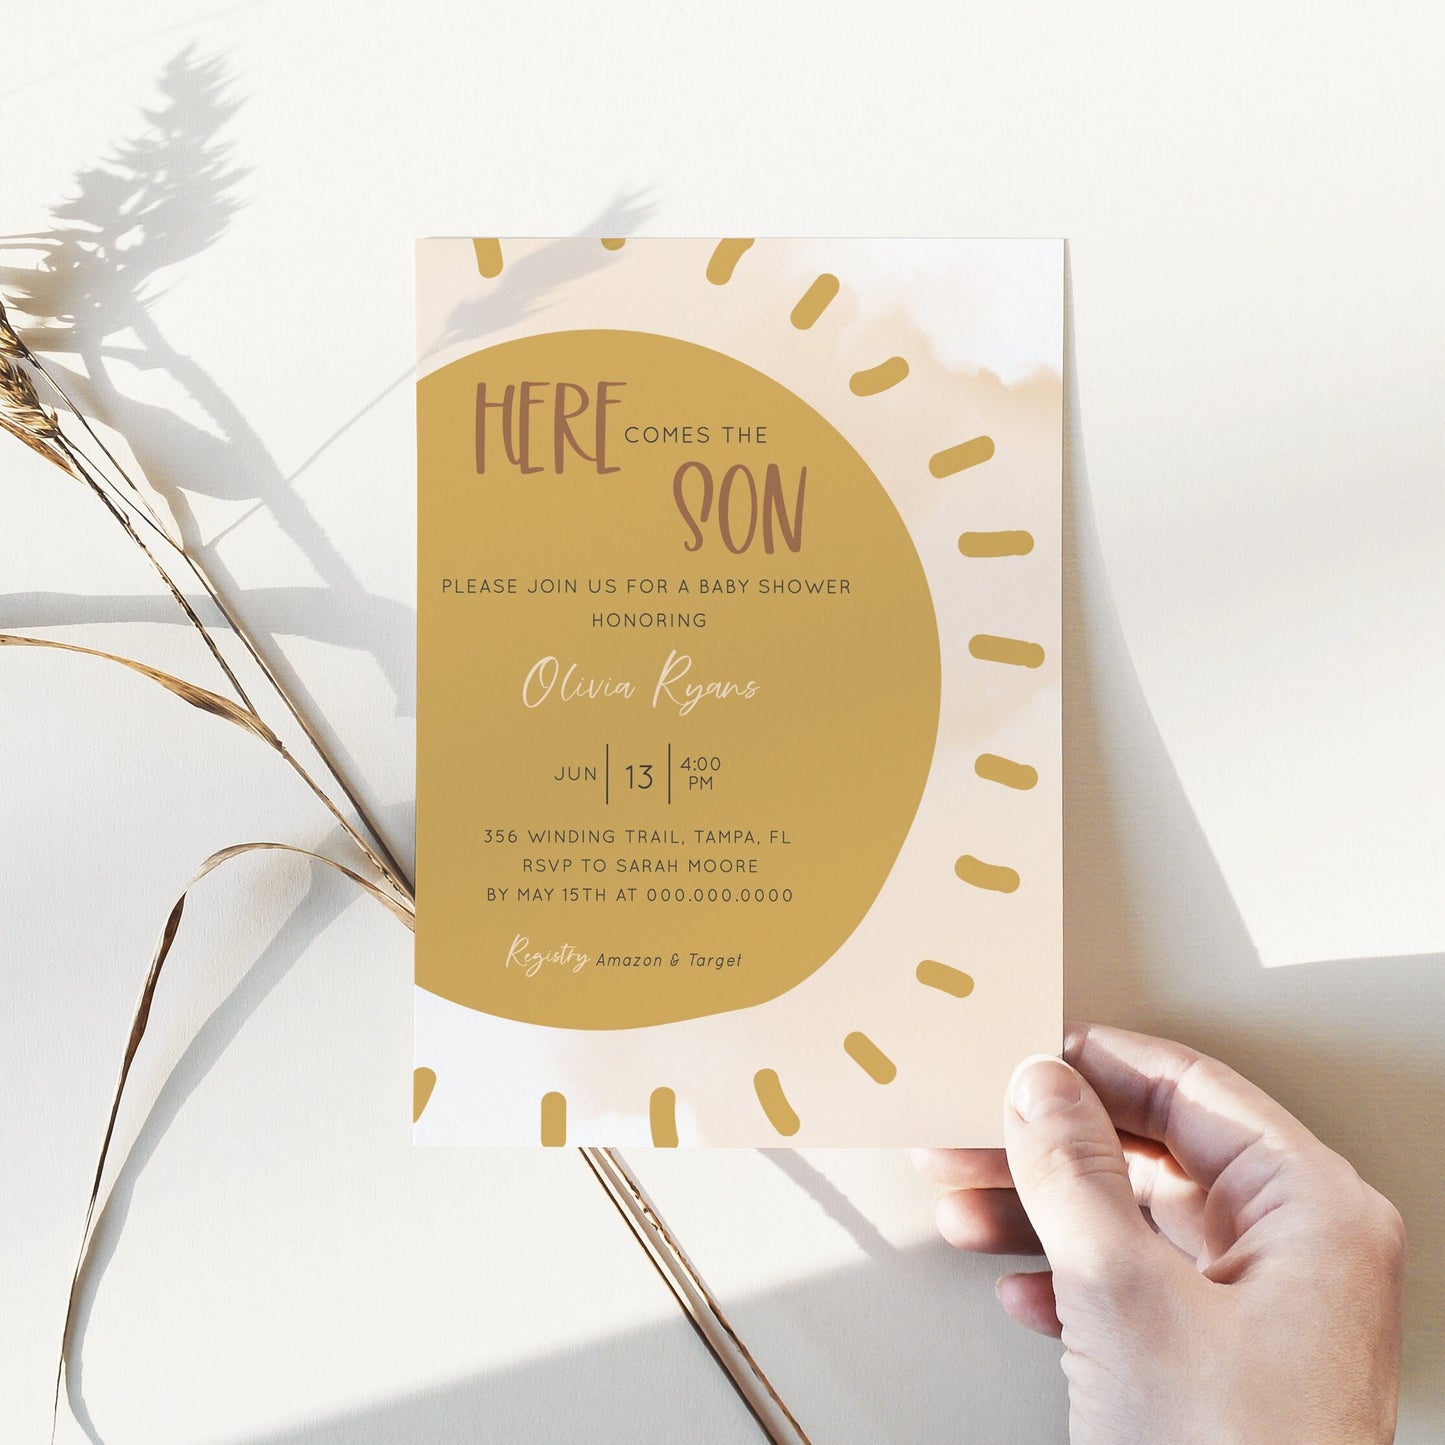 Editable Here Comes the Son Baby Shower Invitation Boho Sun Shower Invite Sunshine Baby Shower Invitation Template